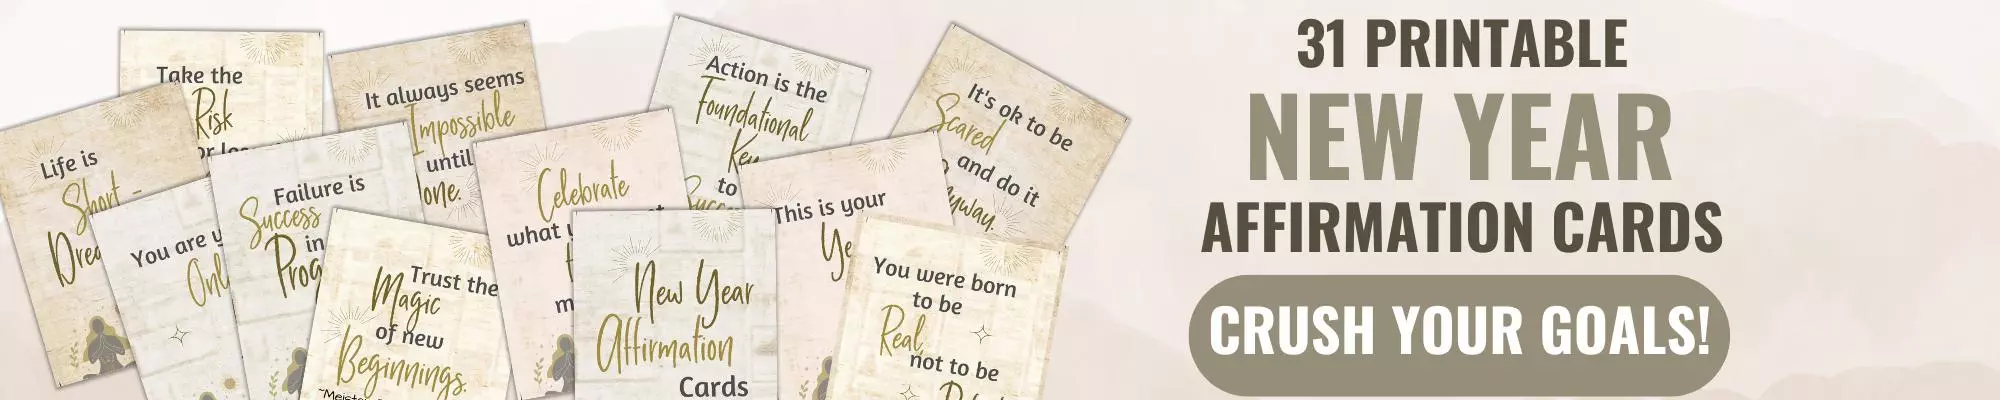 new year affirmation cards banner